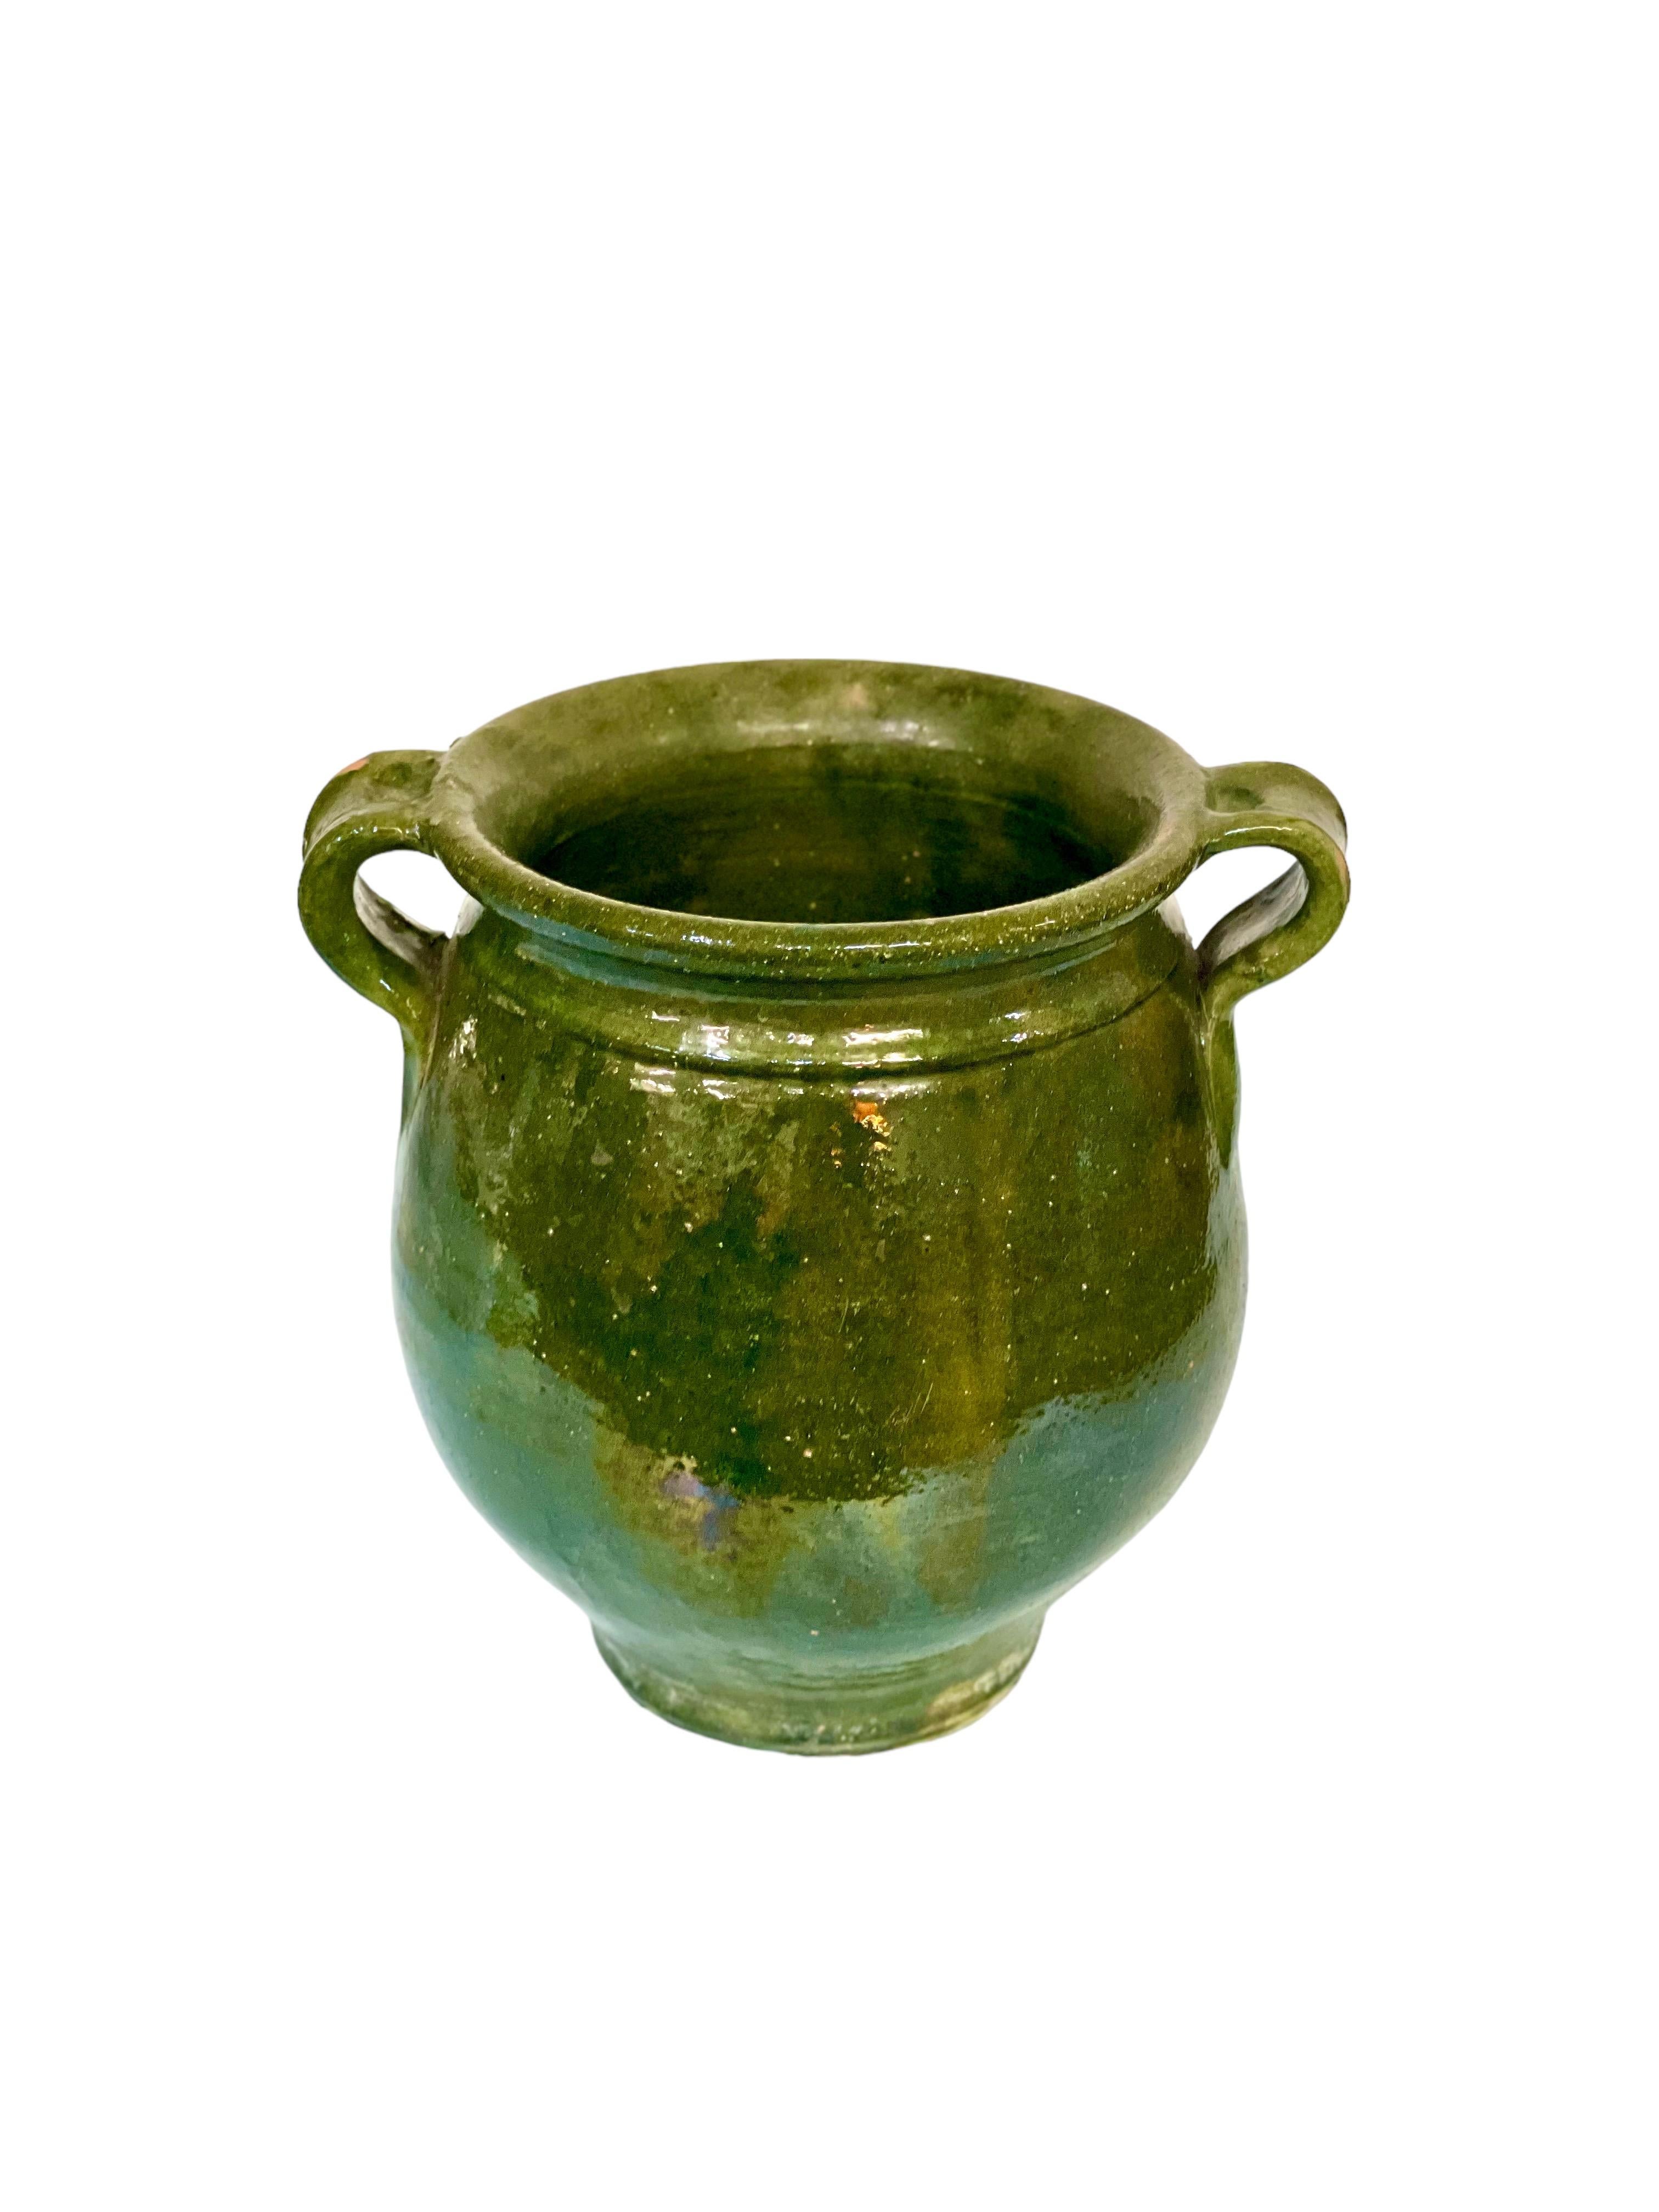 Traditional French terracotta confit pot with dark green glaze and two side handles. Dating from the 19th century, this vessel was used to conserve food – mainly meats in fat – before the invention of refrigeration.